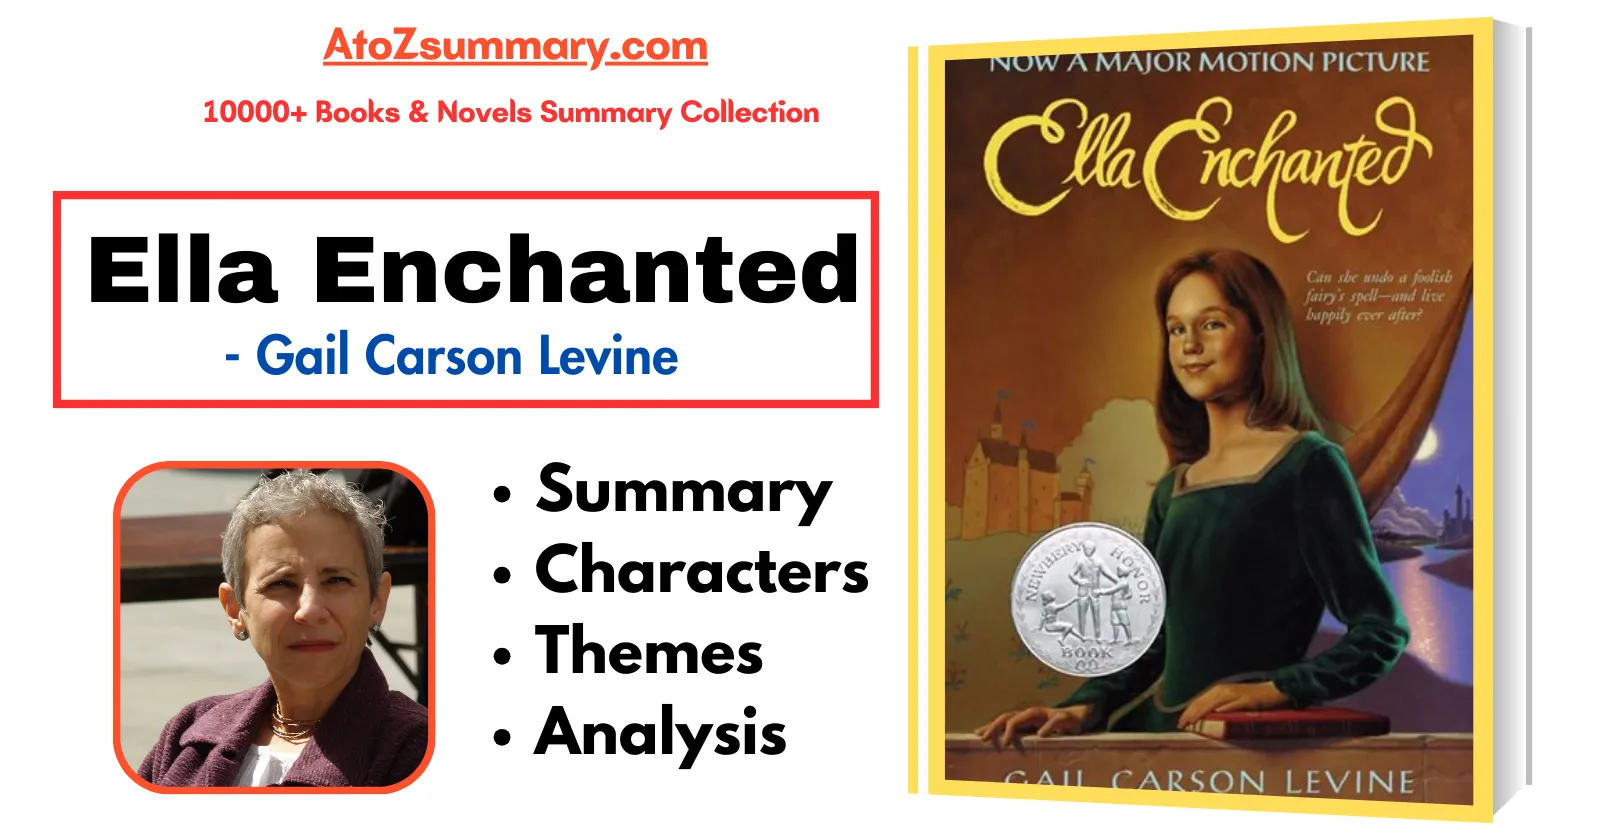 Ella Enchanted by Gail Carson Levine Analysis, Summary, Characters & Themes